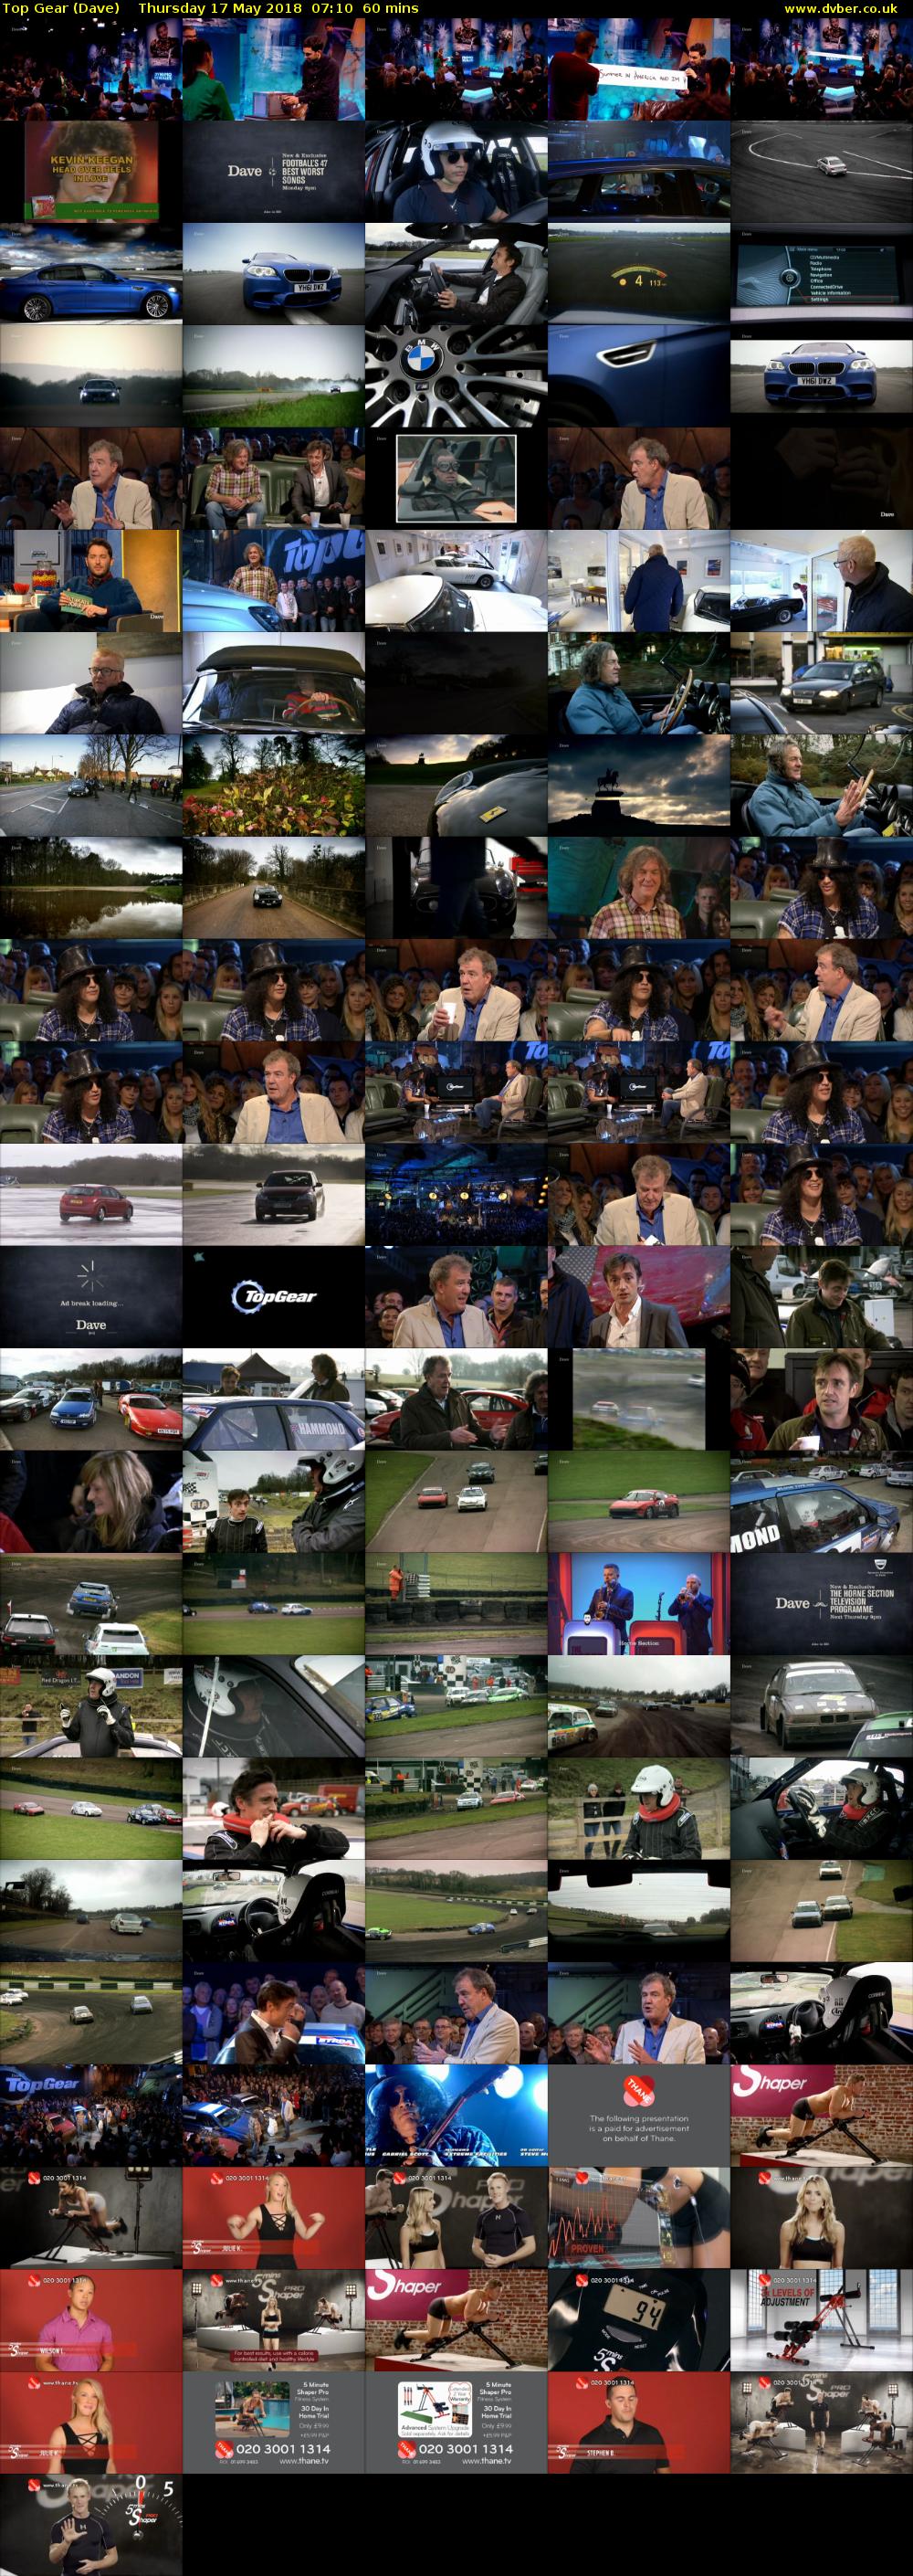 Top Gear (Dave) Thursday 17 May 2018 07:10 - 08:10